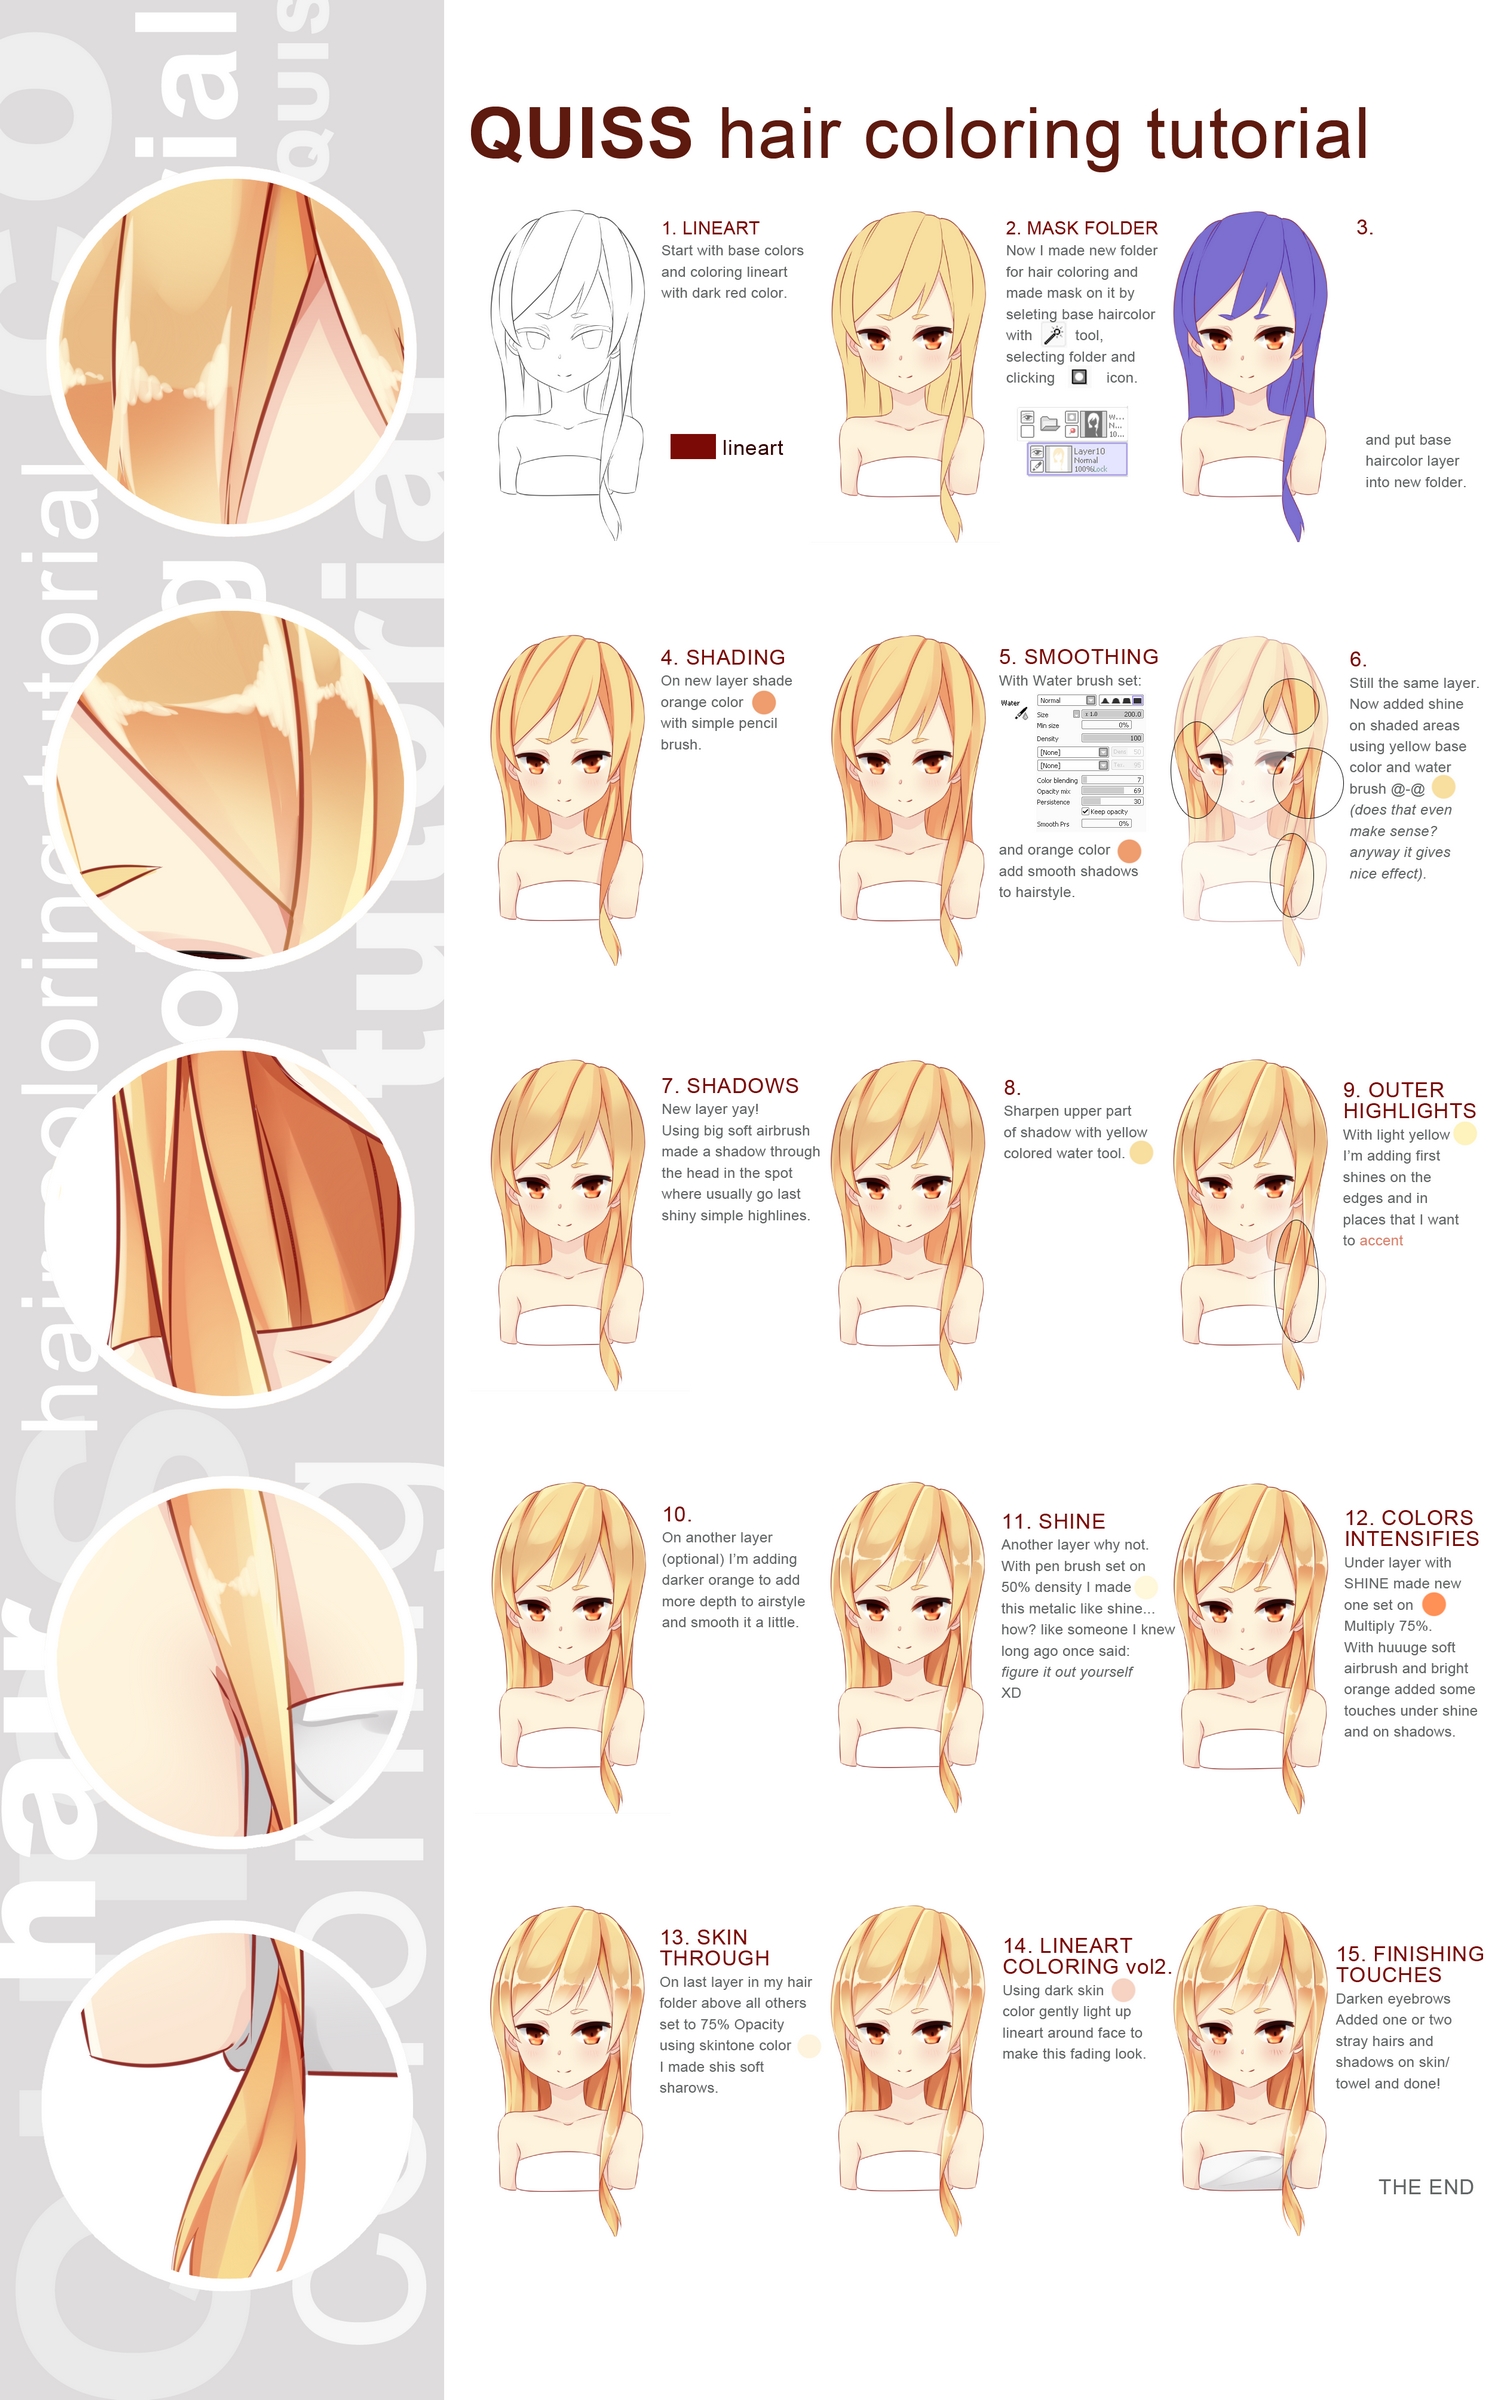 Hair coloring tutorial by Quiss on DeviantArt